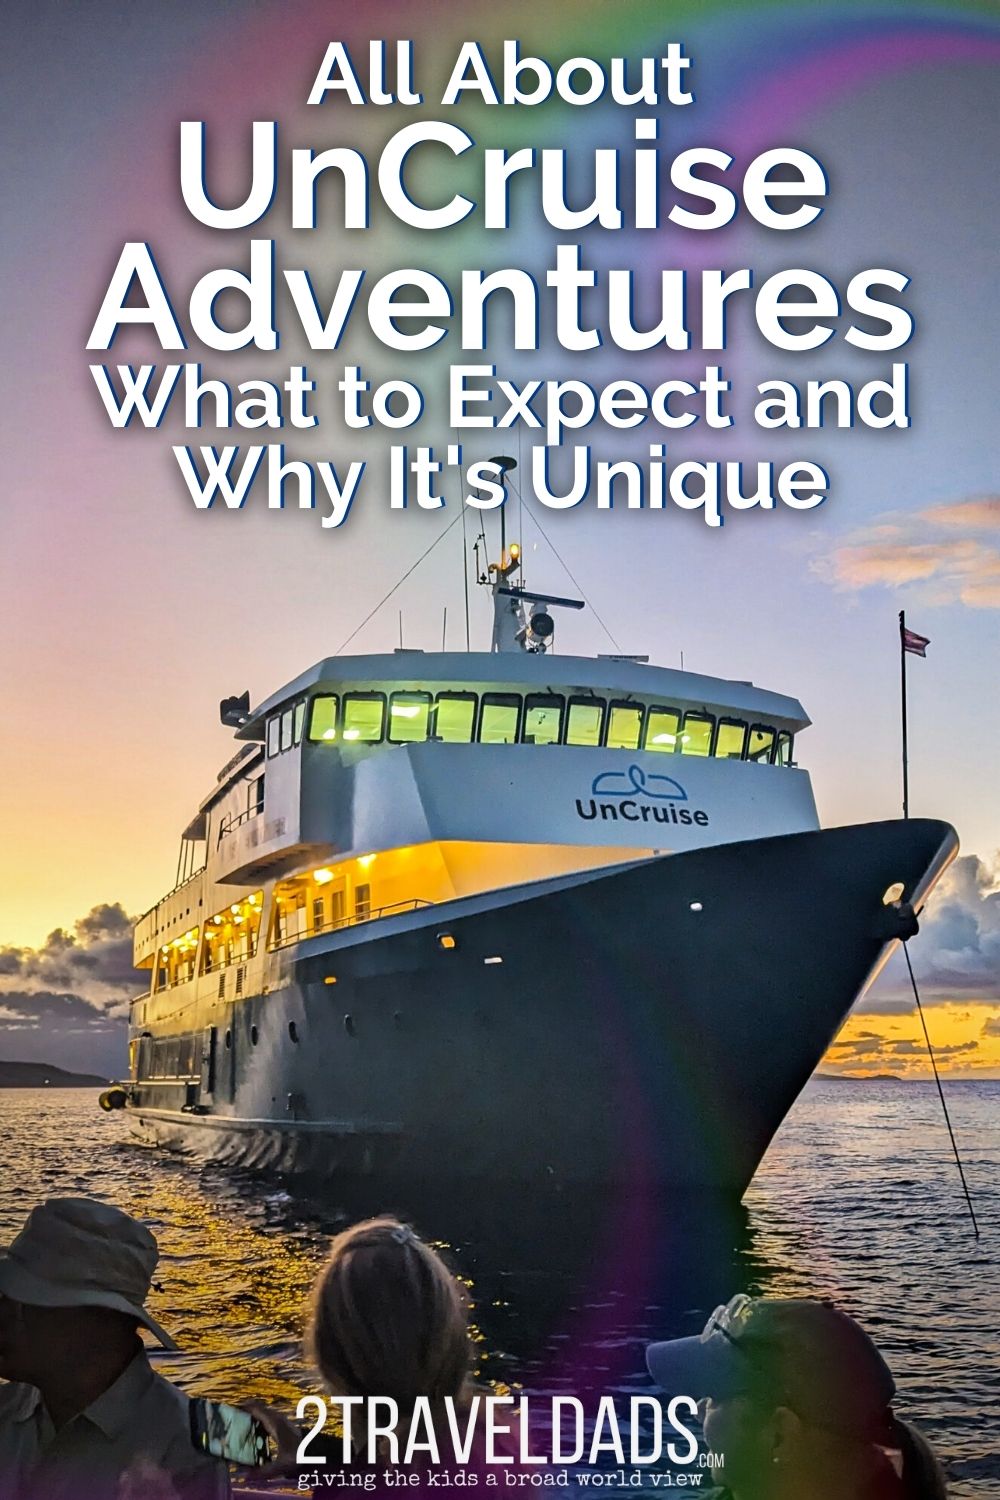 Unsure about what UnCruise sailings entail or want to see if an UnCruise Adventure is right for you? We explain the difference between UnCruise small ship sailing vs mega cruise ships, what makes the experience unique, and even break down the cost differences between UnCruise, mega cruise, or independent island hopping.